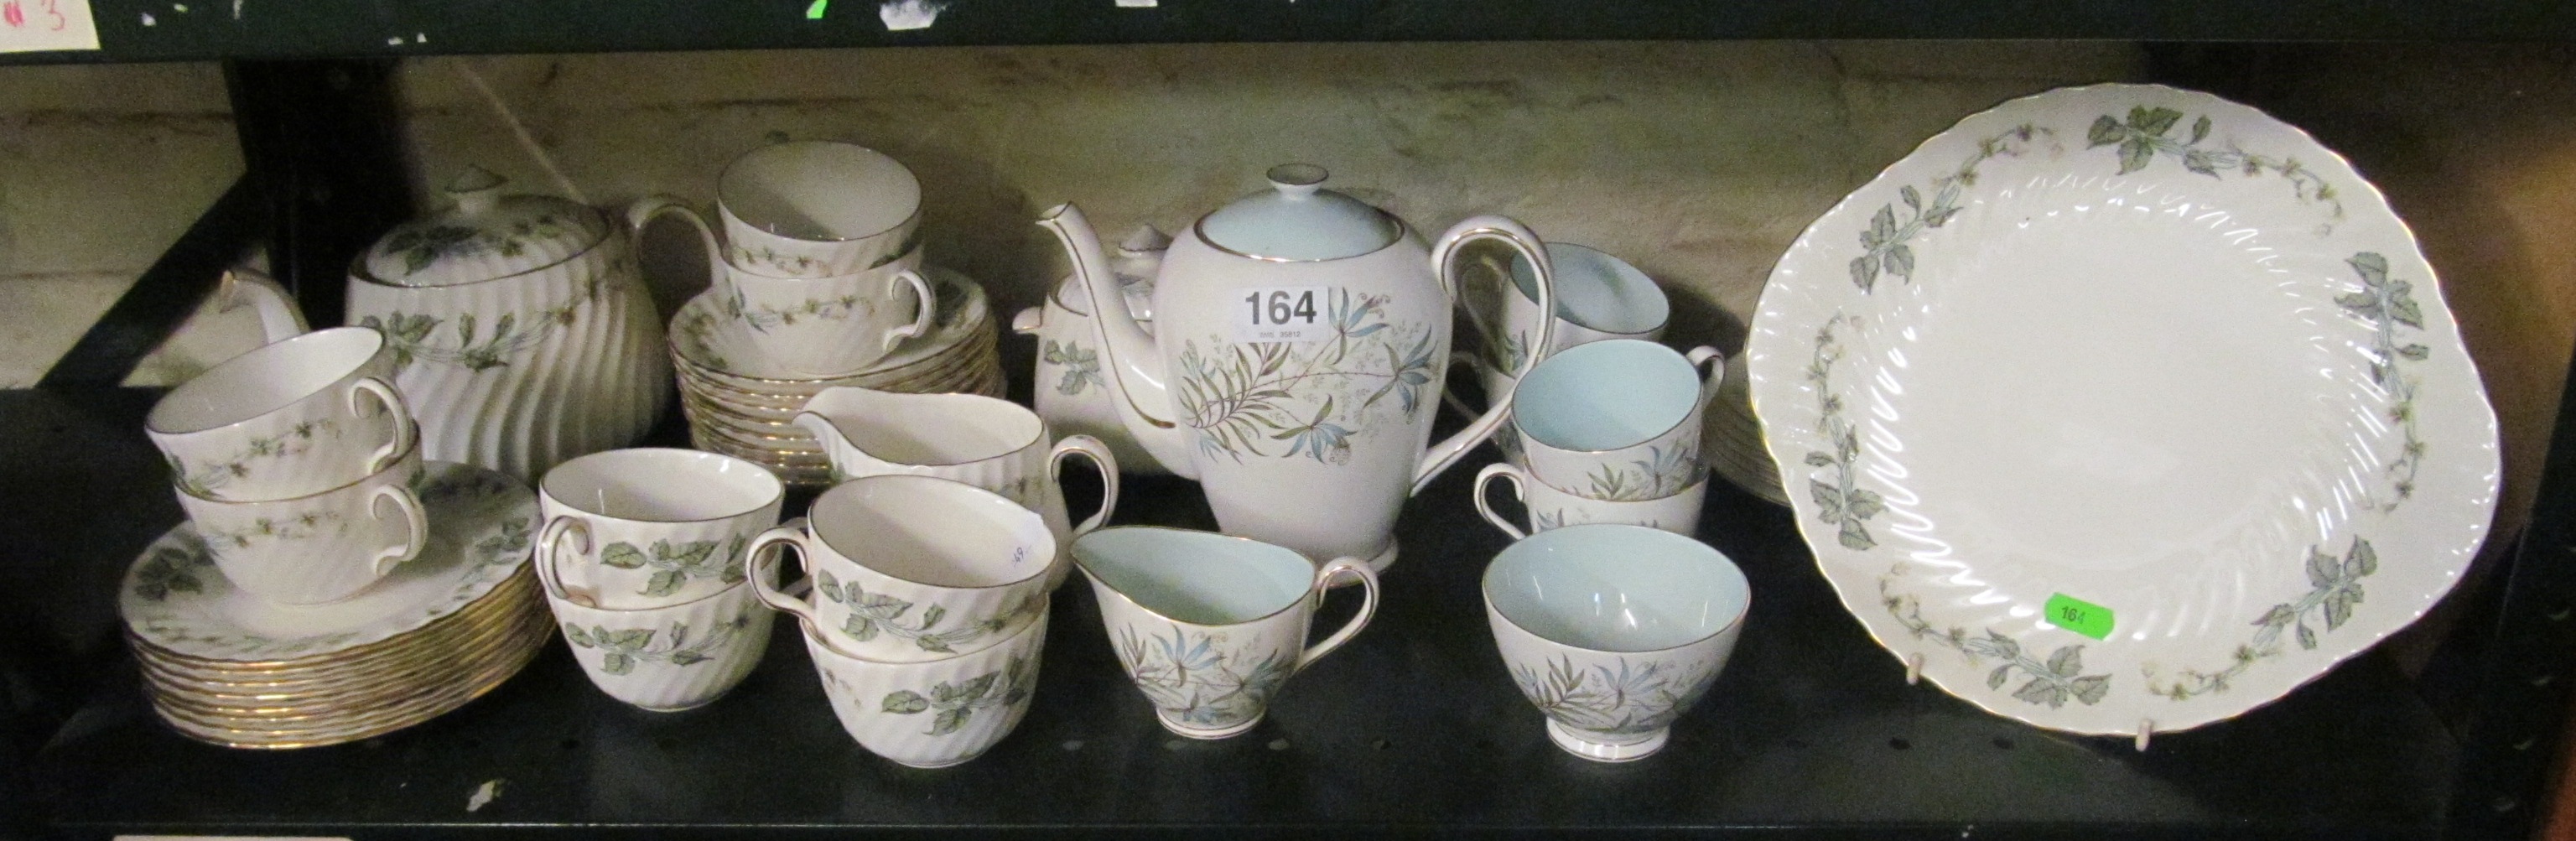 A Tuscan Lily part teaset and a Minton Greenwich teaset.